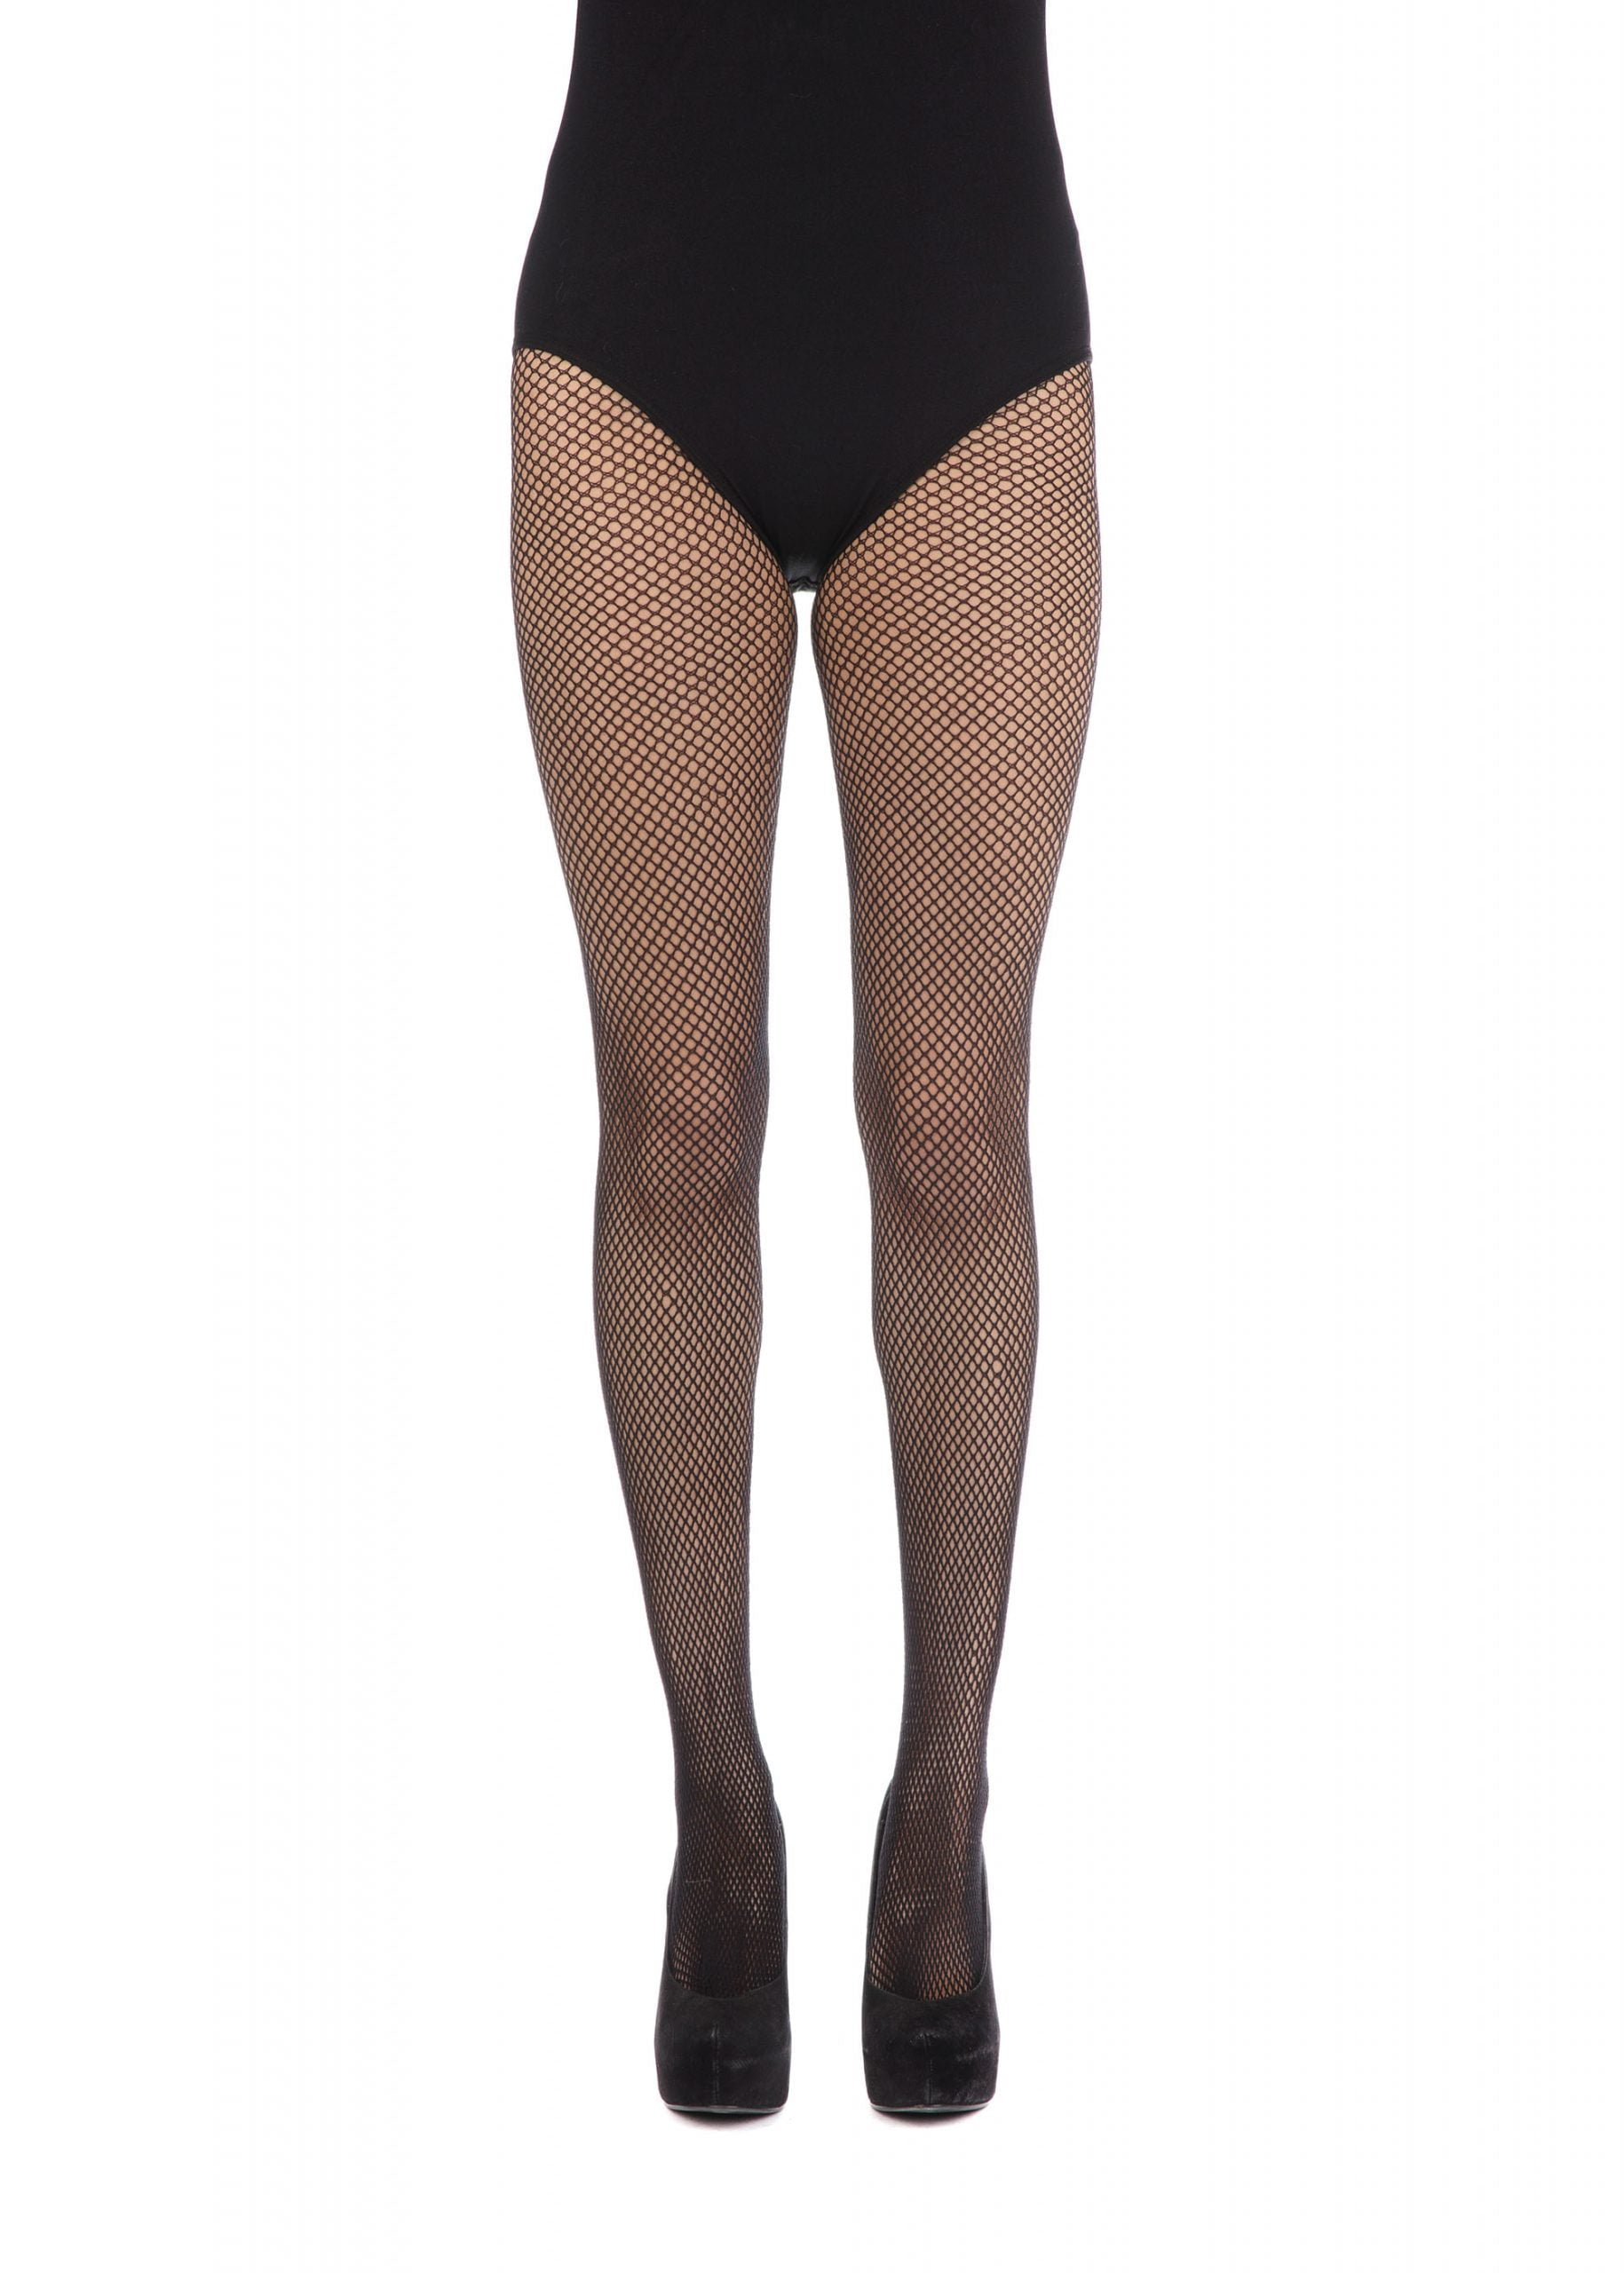 Dollarama Halloween Adult Fishnet Tights (each) Delivery or Pickup